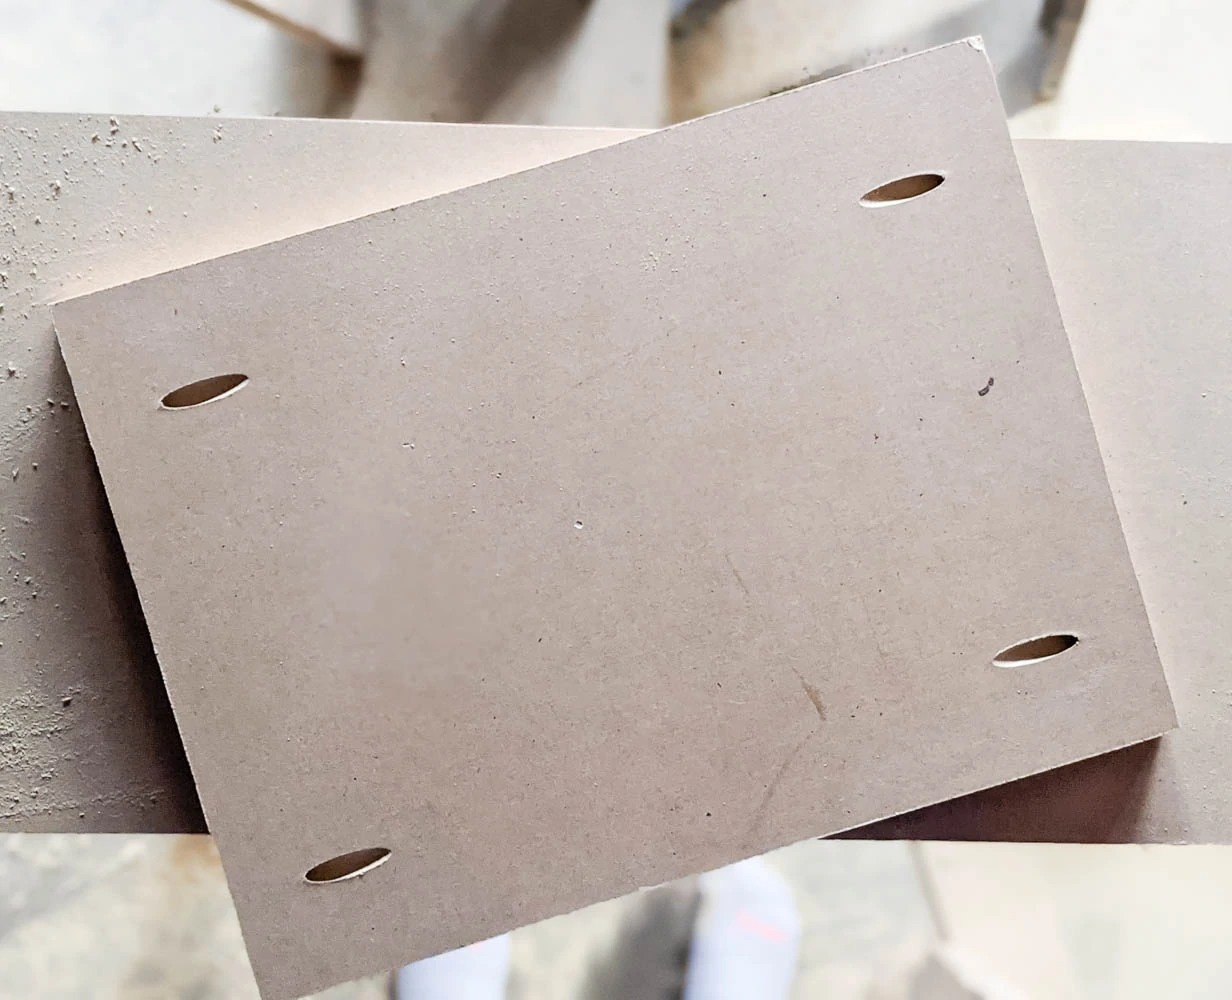 Bottom of MDF shelf with four pocket holes, two on each short side.